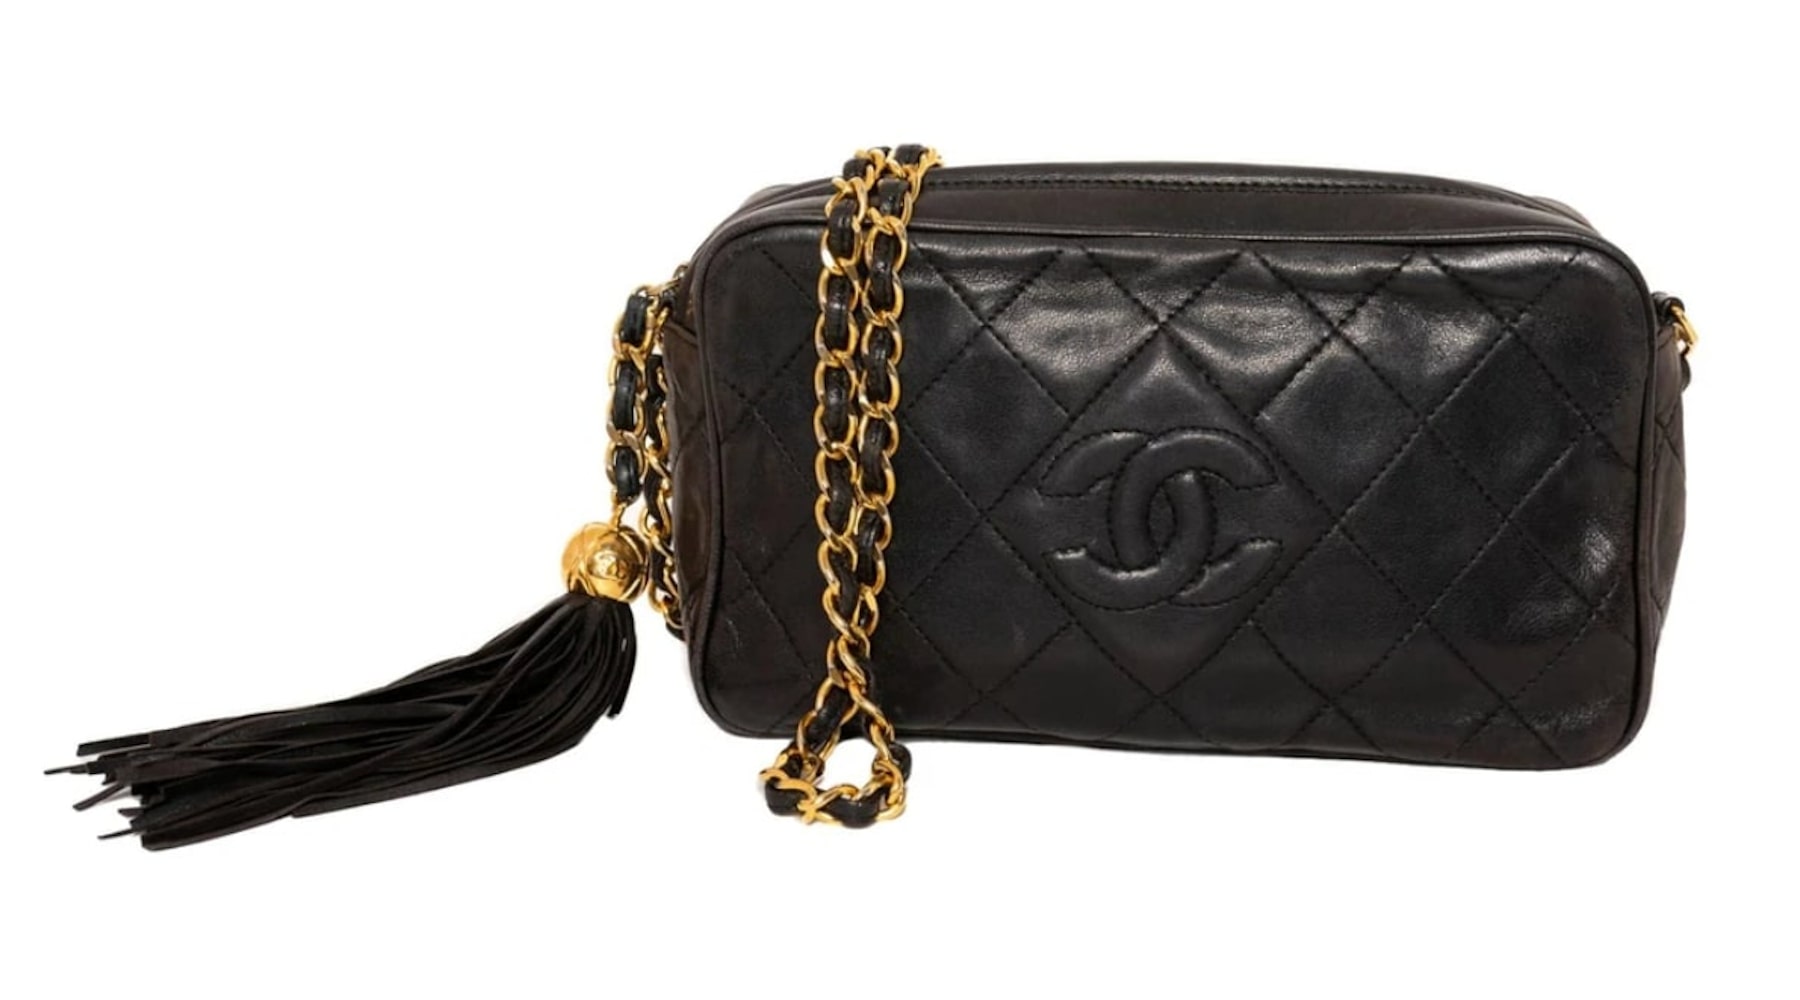 Lost and Found: AWL1214 Chanel Camera bag with Tassel – LuxuryPromise